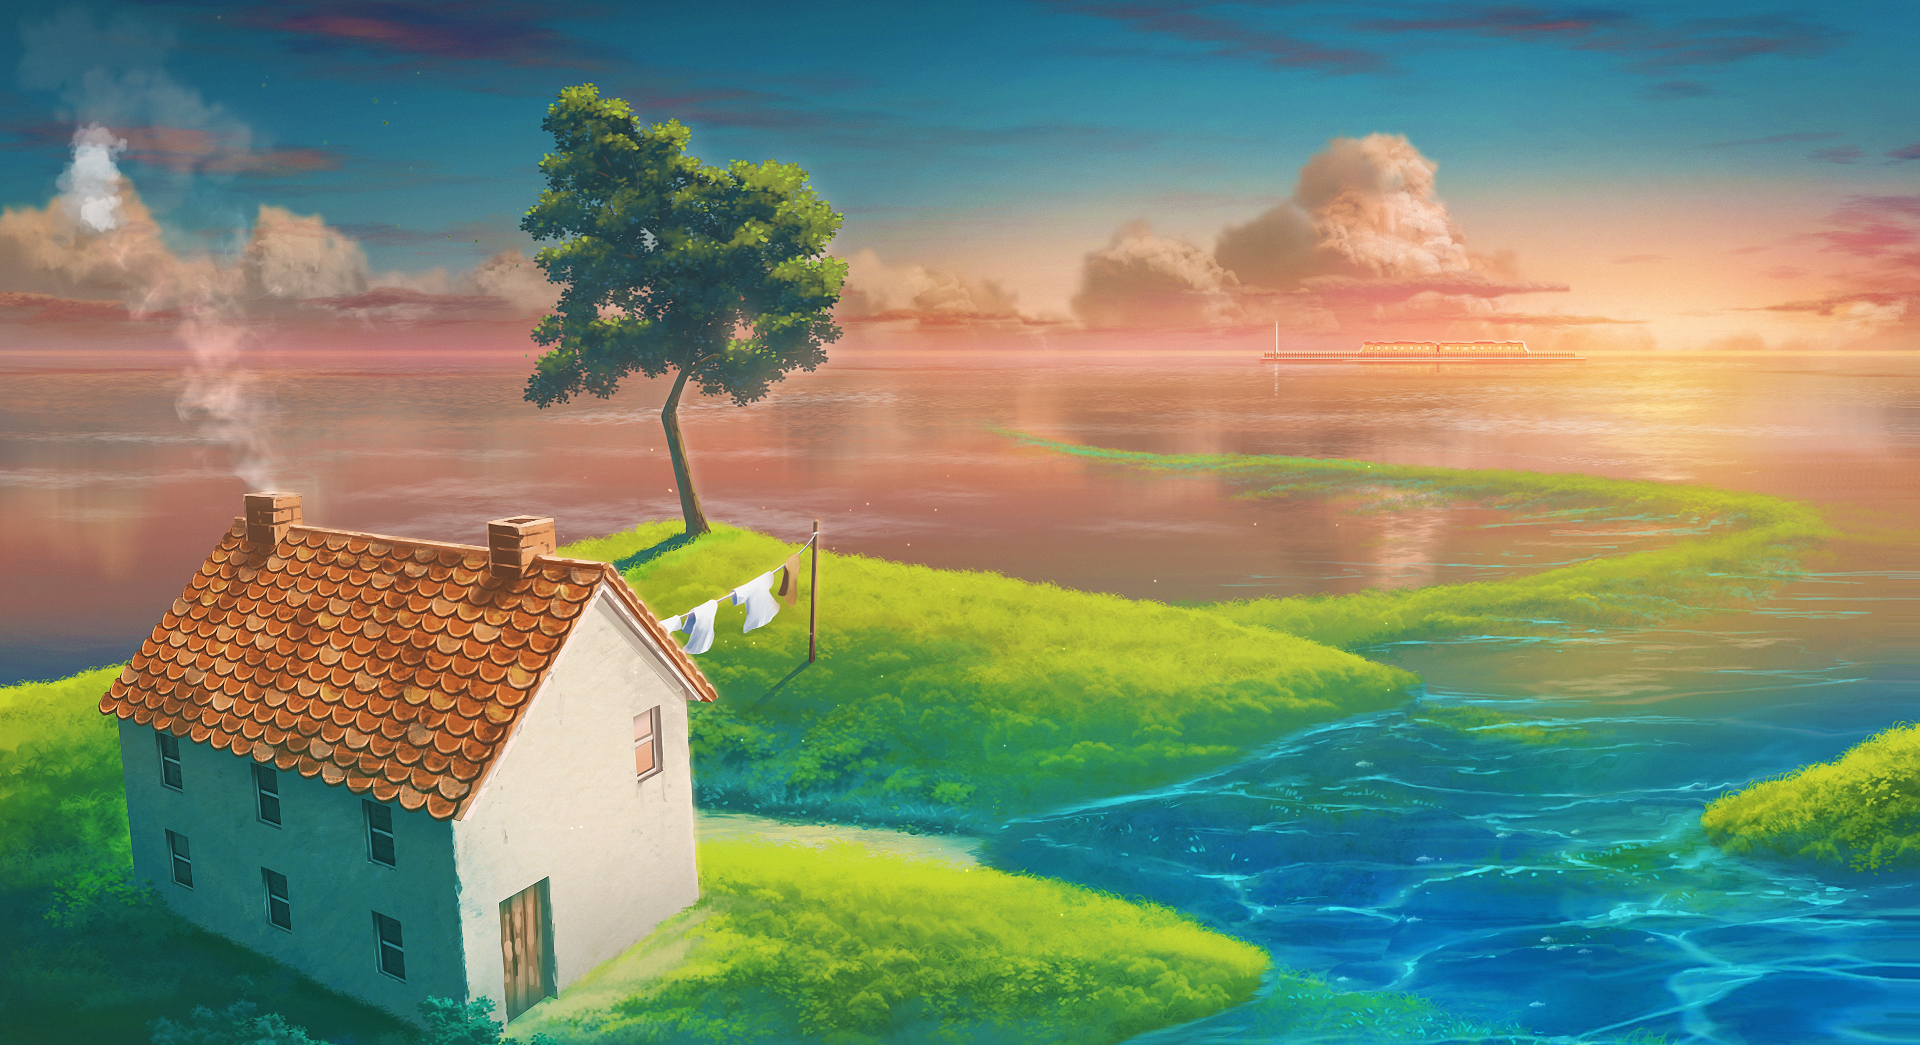 House on the hill around the water morning 4K live wallpaper [DOWNLOAD FREE]